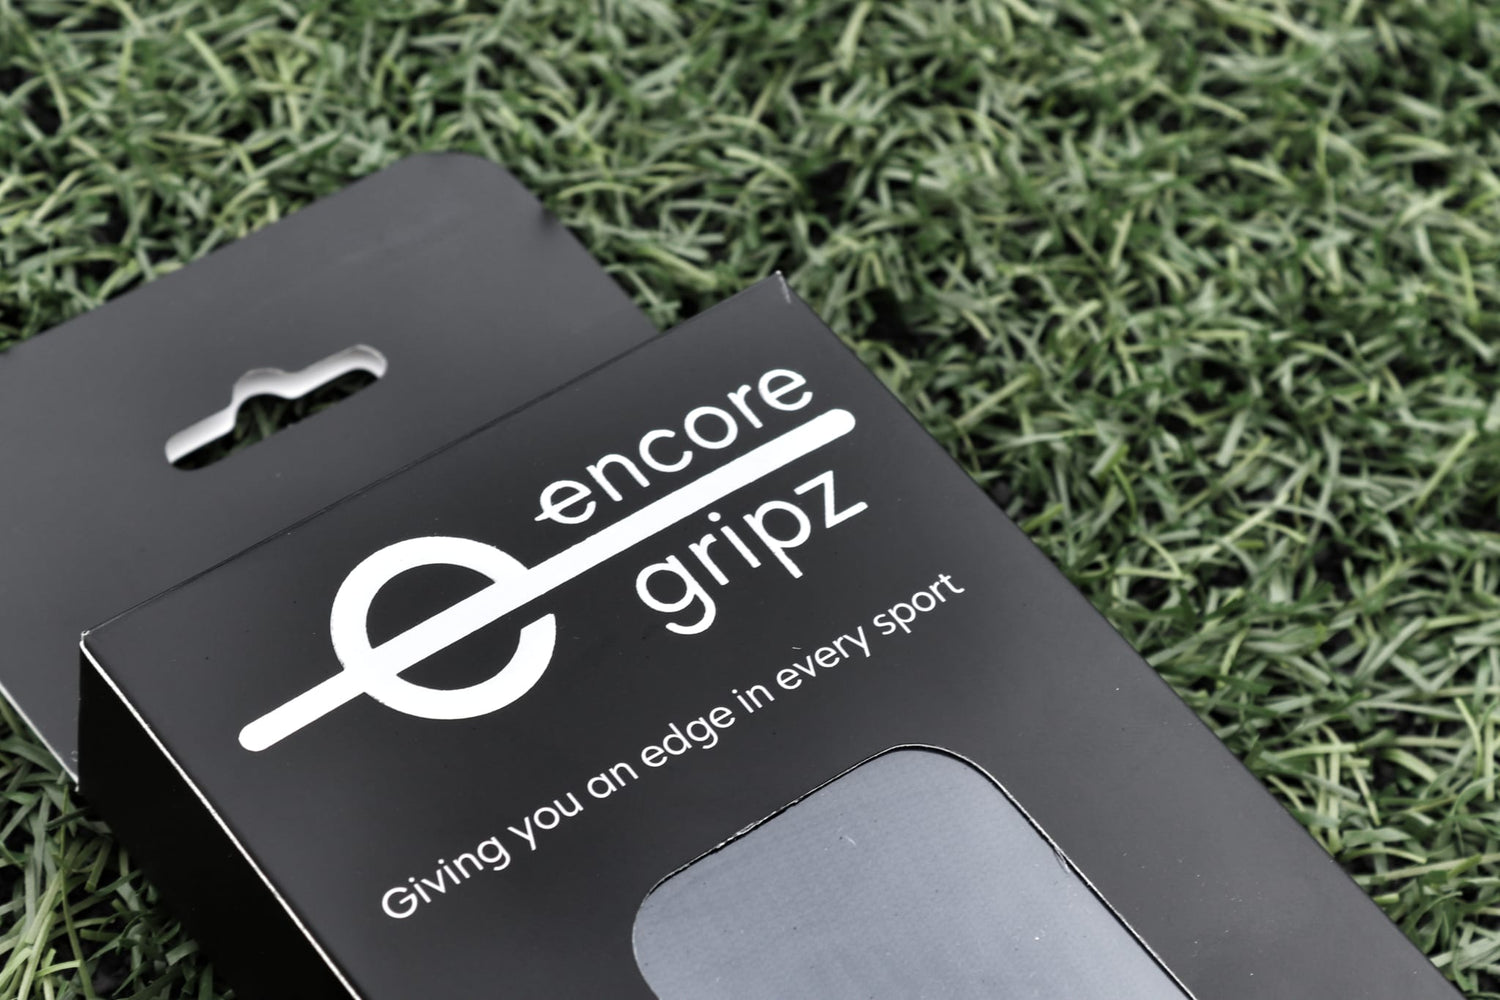 the packaging box for encore non-slip grip socks on a football field background